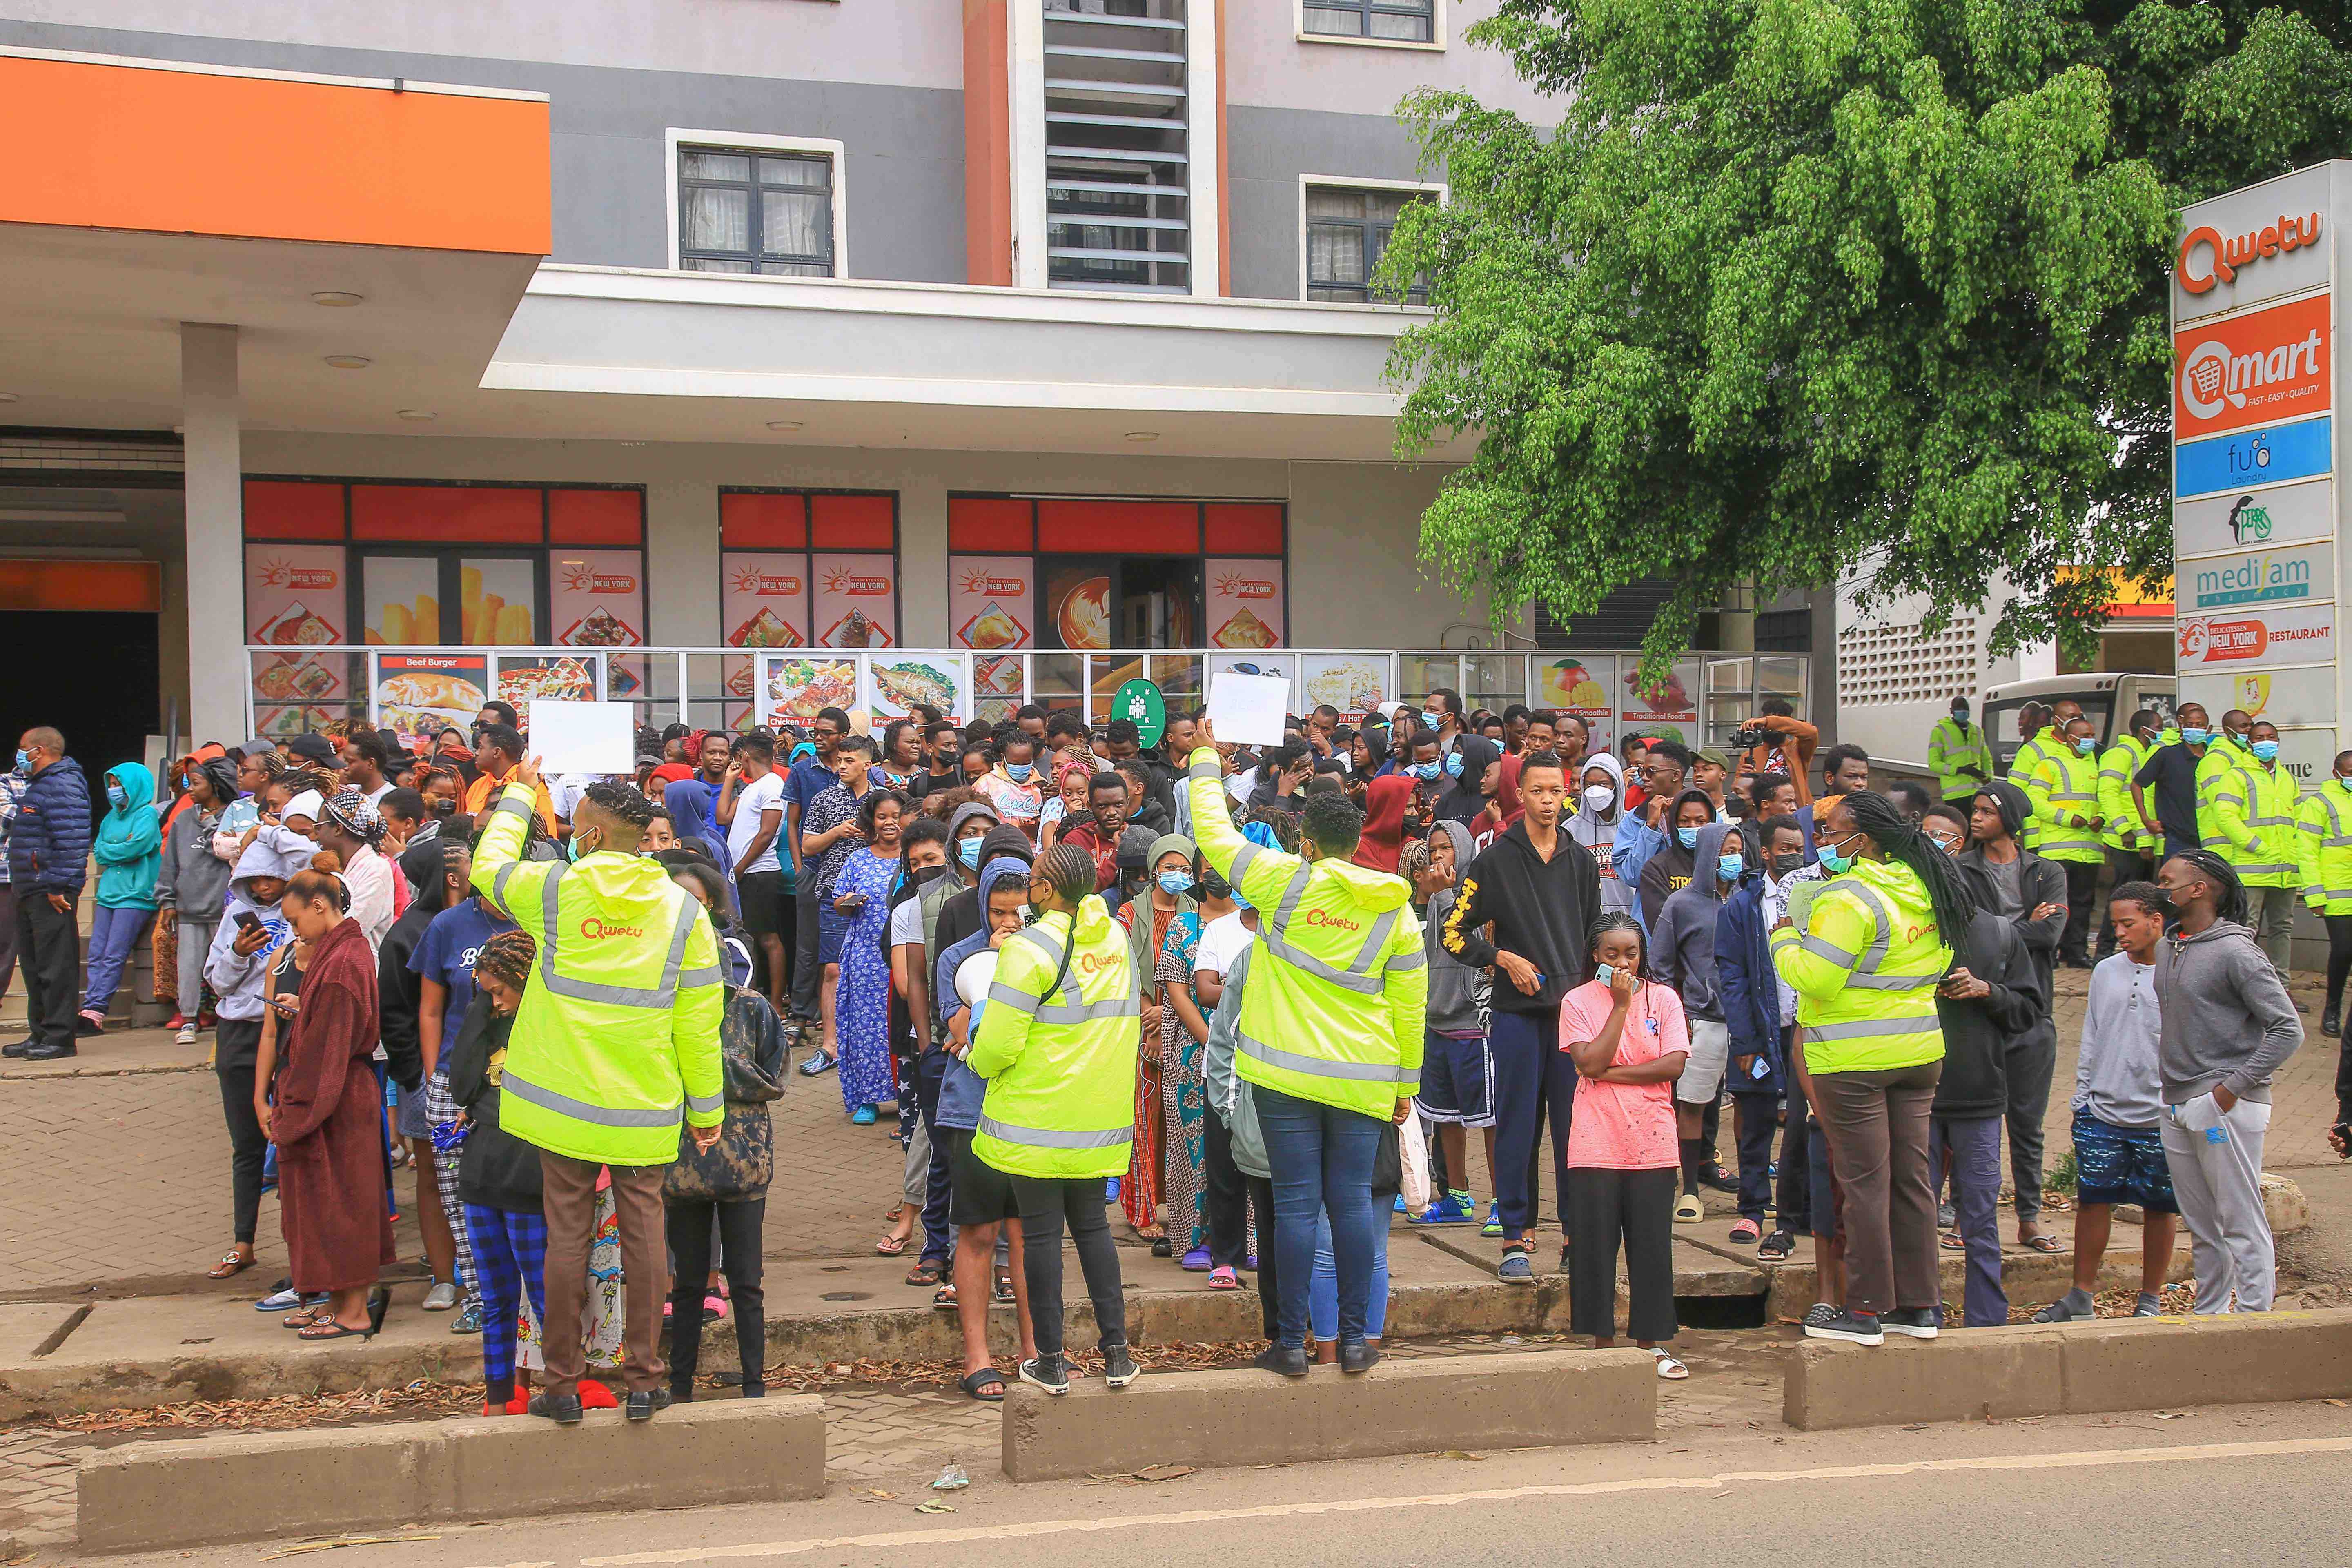 Qwetu student residences tenants take part in a fire and safety drill as part of Qwetu management’s commitment to ensure that all properties meet the highest safety standards and improve overall preparedness in response to emergencies. PHOTO/COURTESY